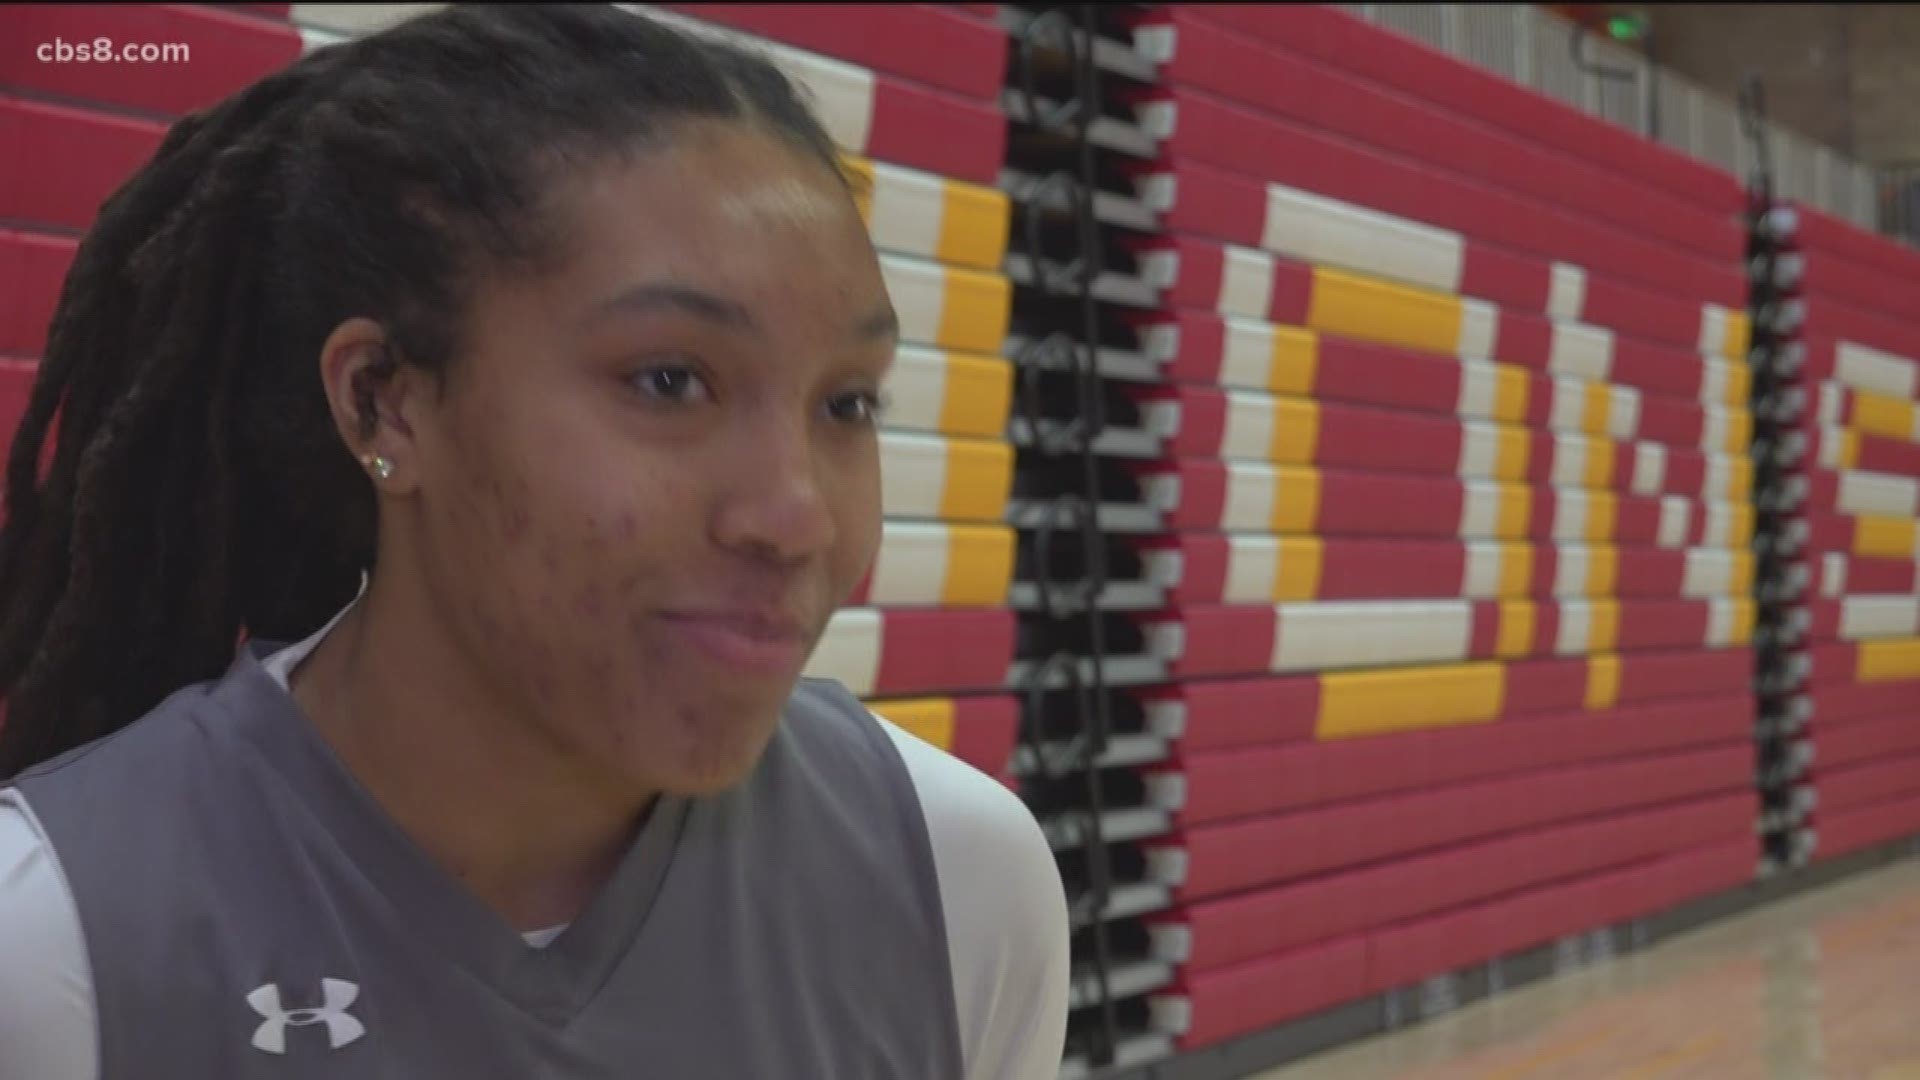 Cathedral Catholic High School's Isuneh “Ice” Brady has ice in her veins as an early commit to one of the most successful women’s basketball programs in the country.